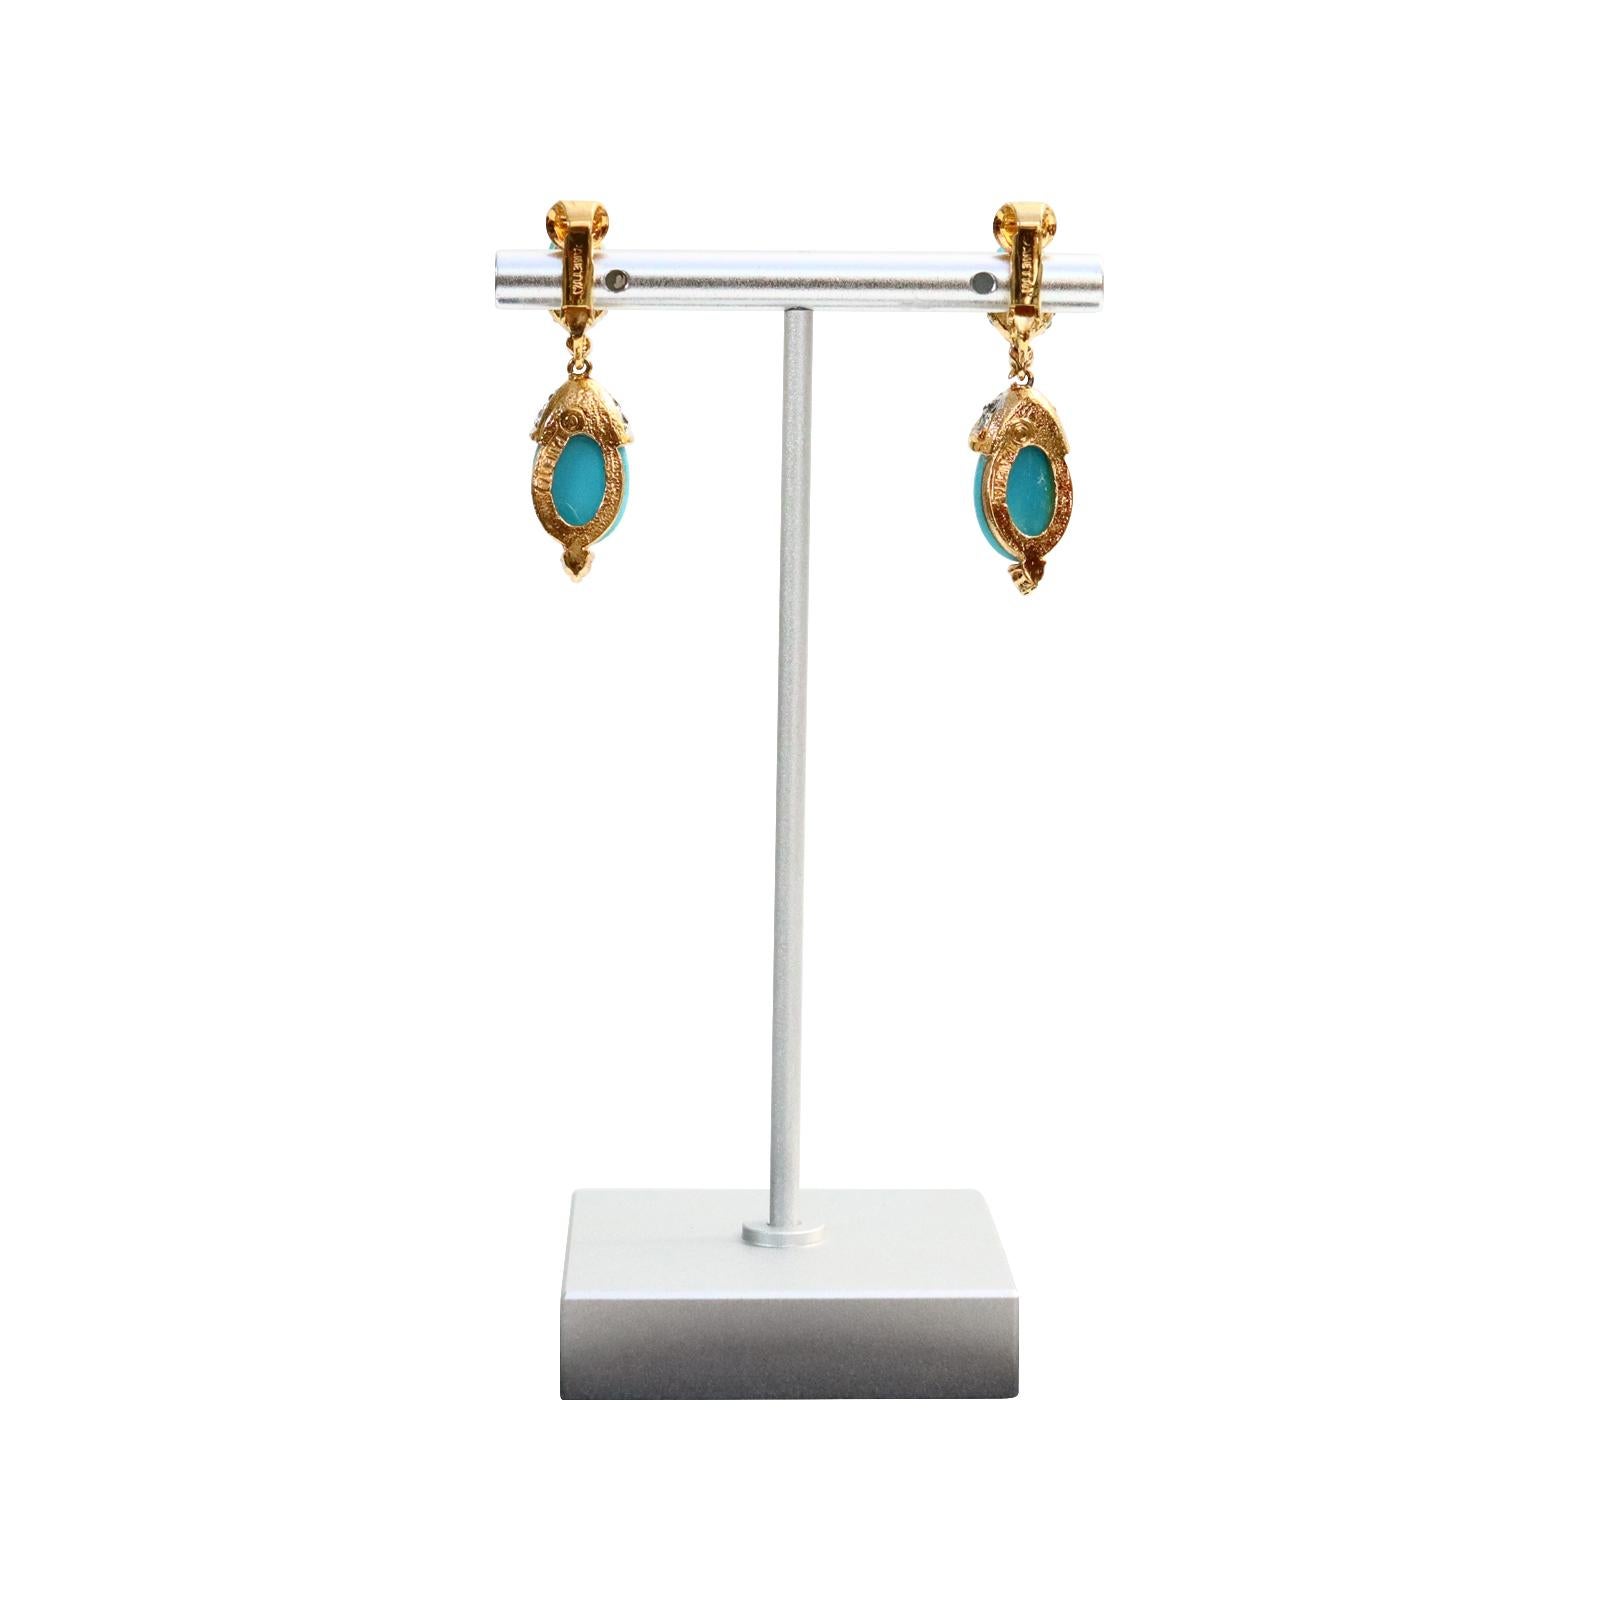 Vintage Panetta Faux Turquoise Dangling Earrings Circa 1980s For Sale 2